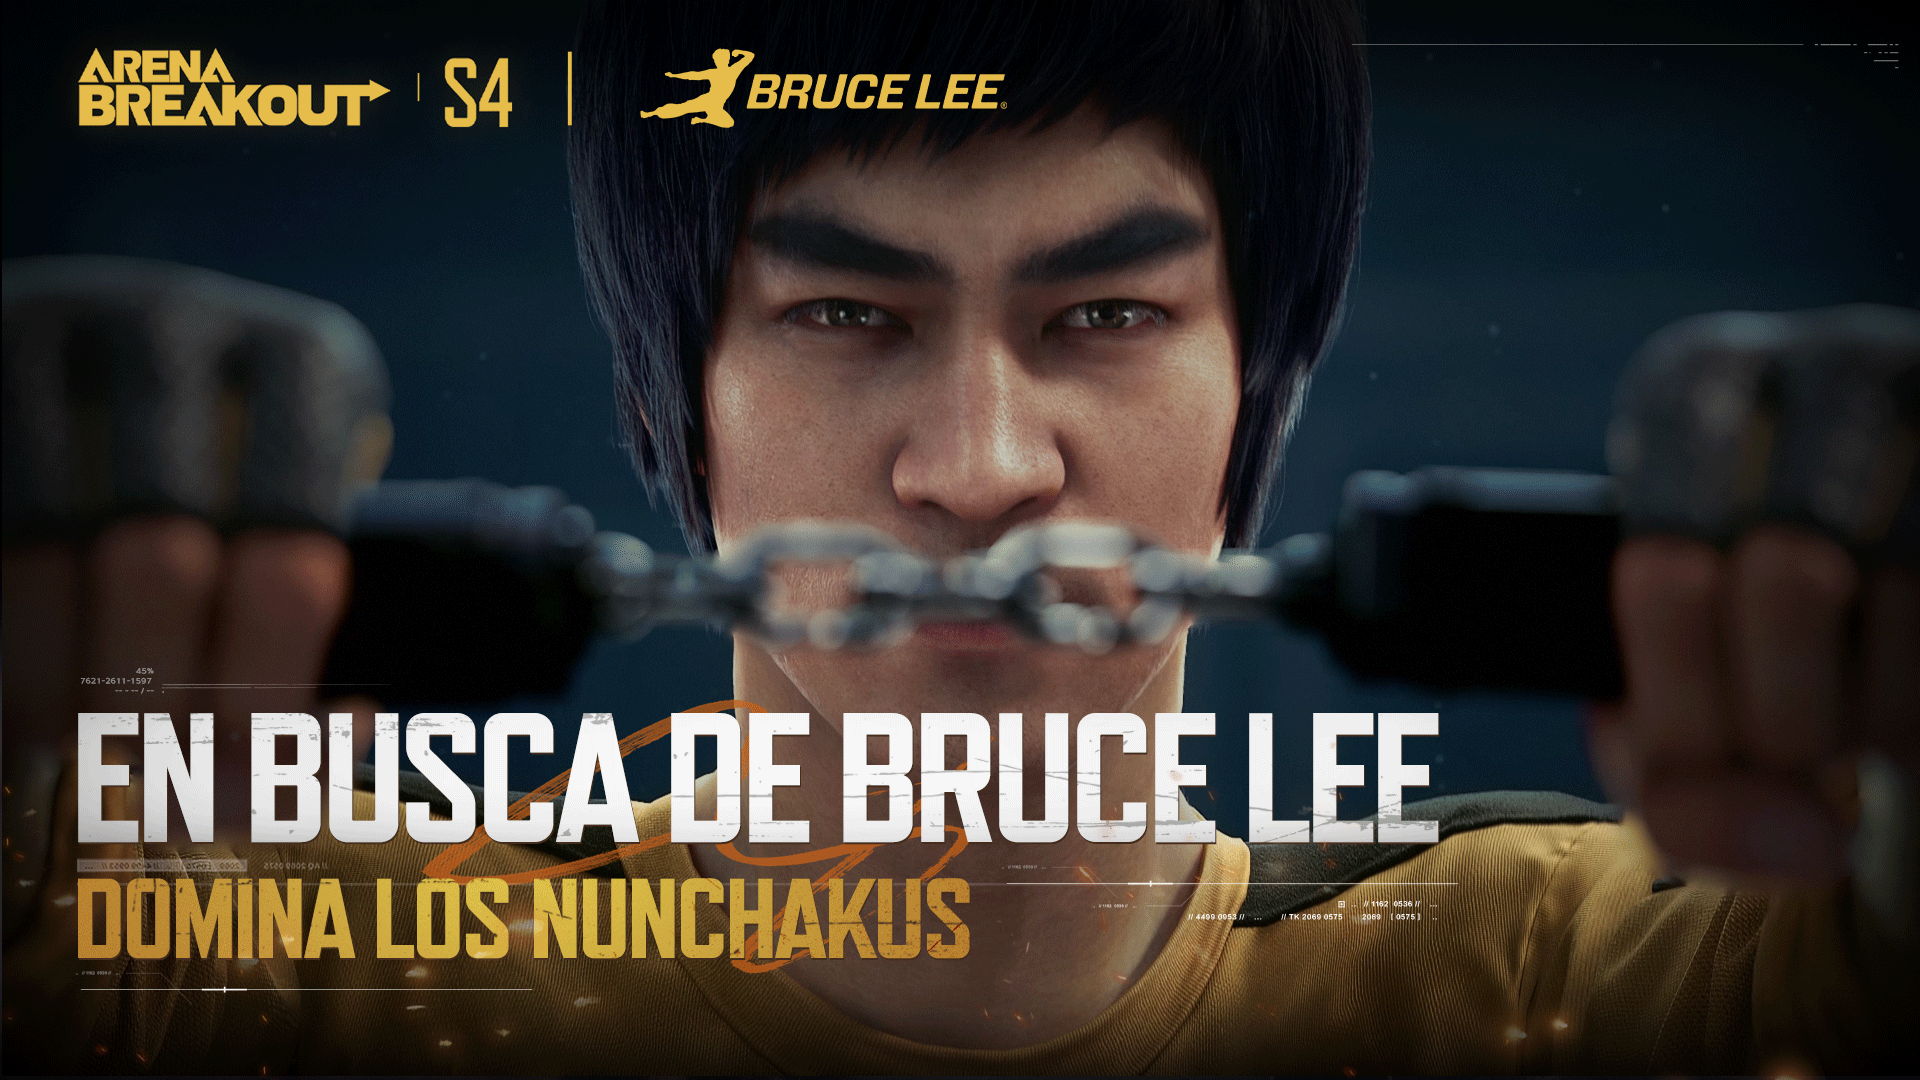 Bruce Lee x Arena Breakout